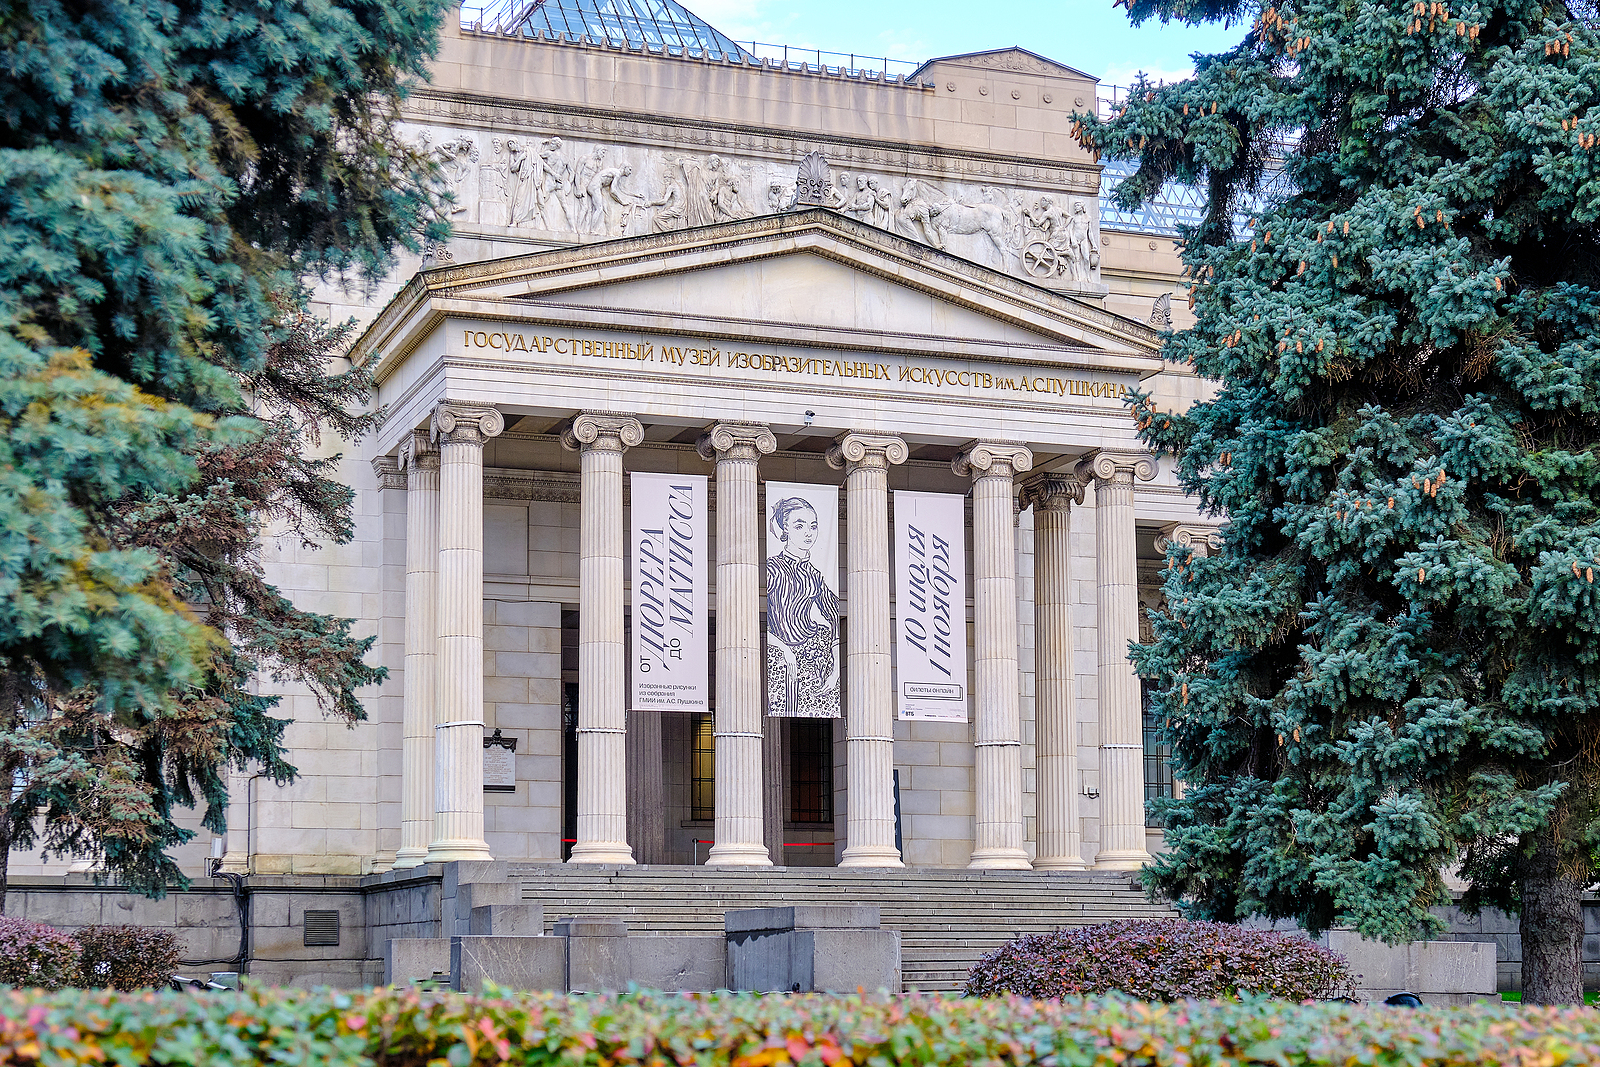 The Pushkin Museum – Home to Remarkable European Art in Moscow